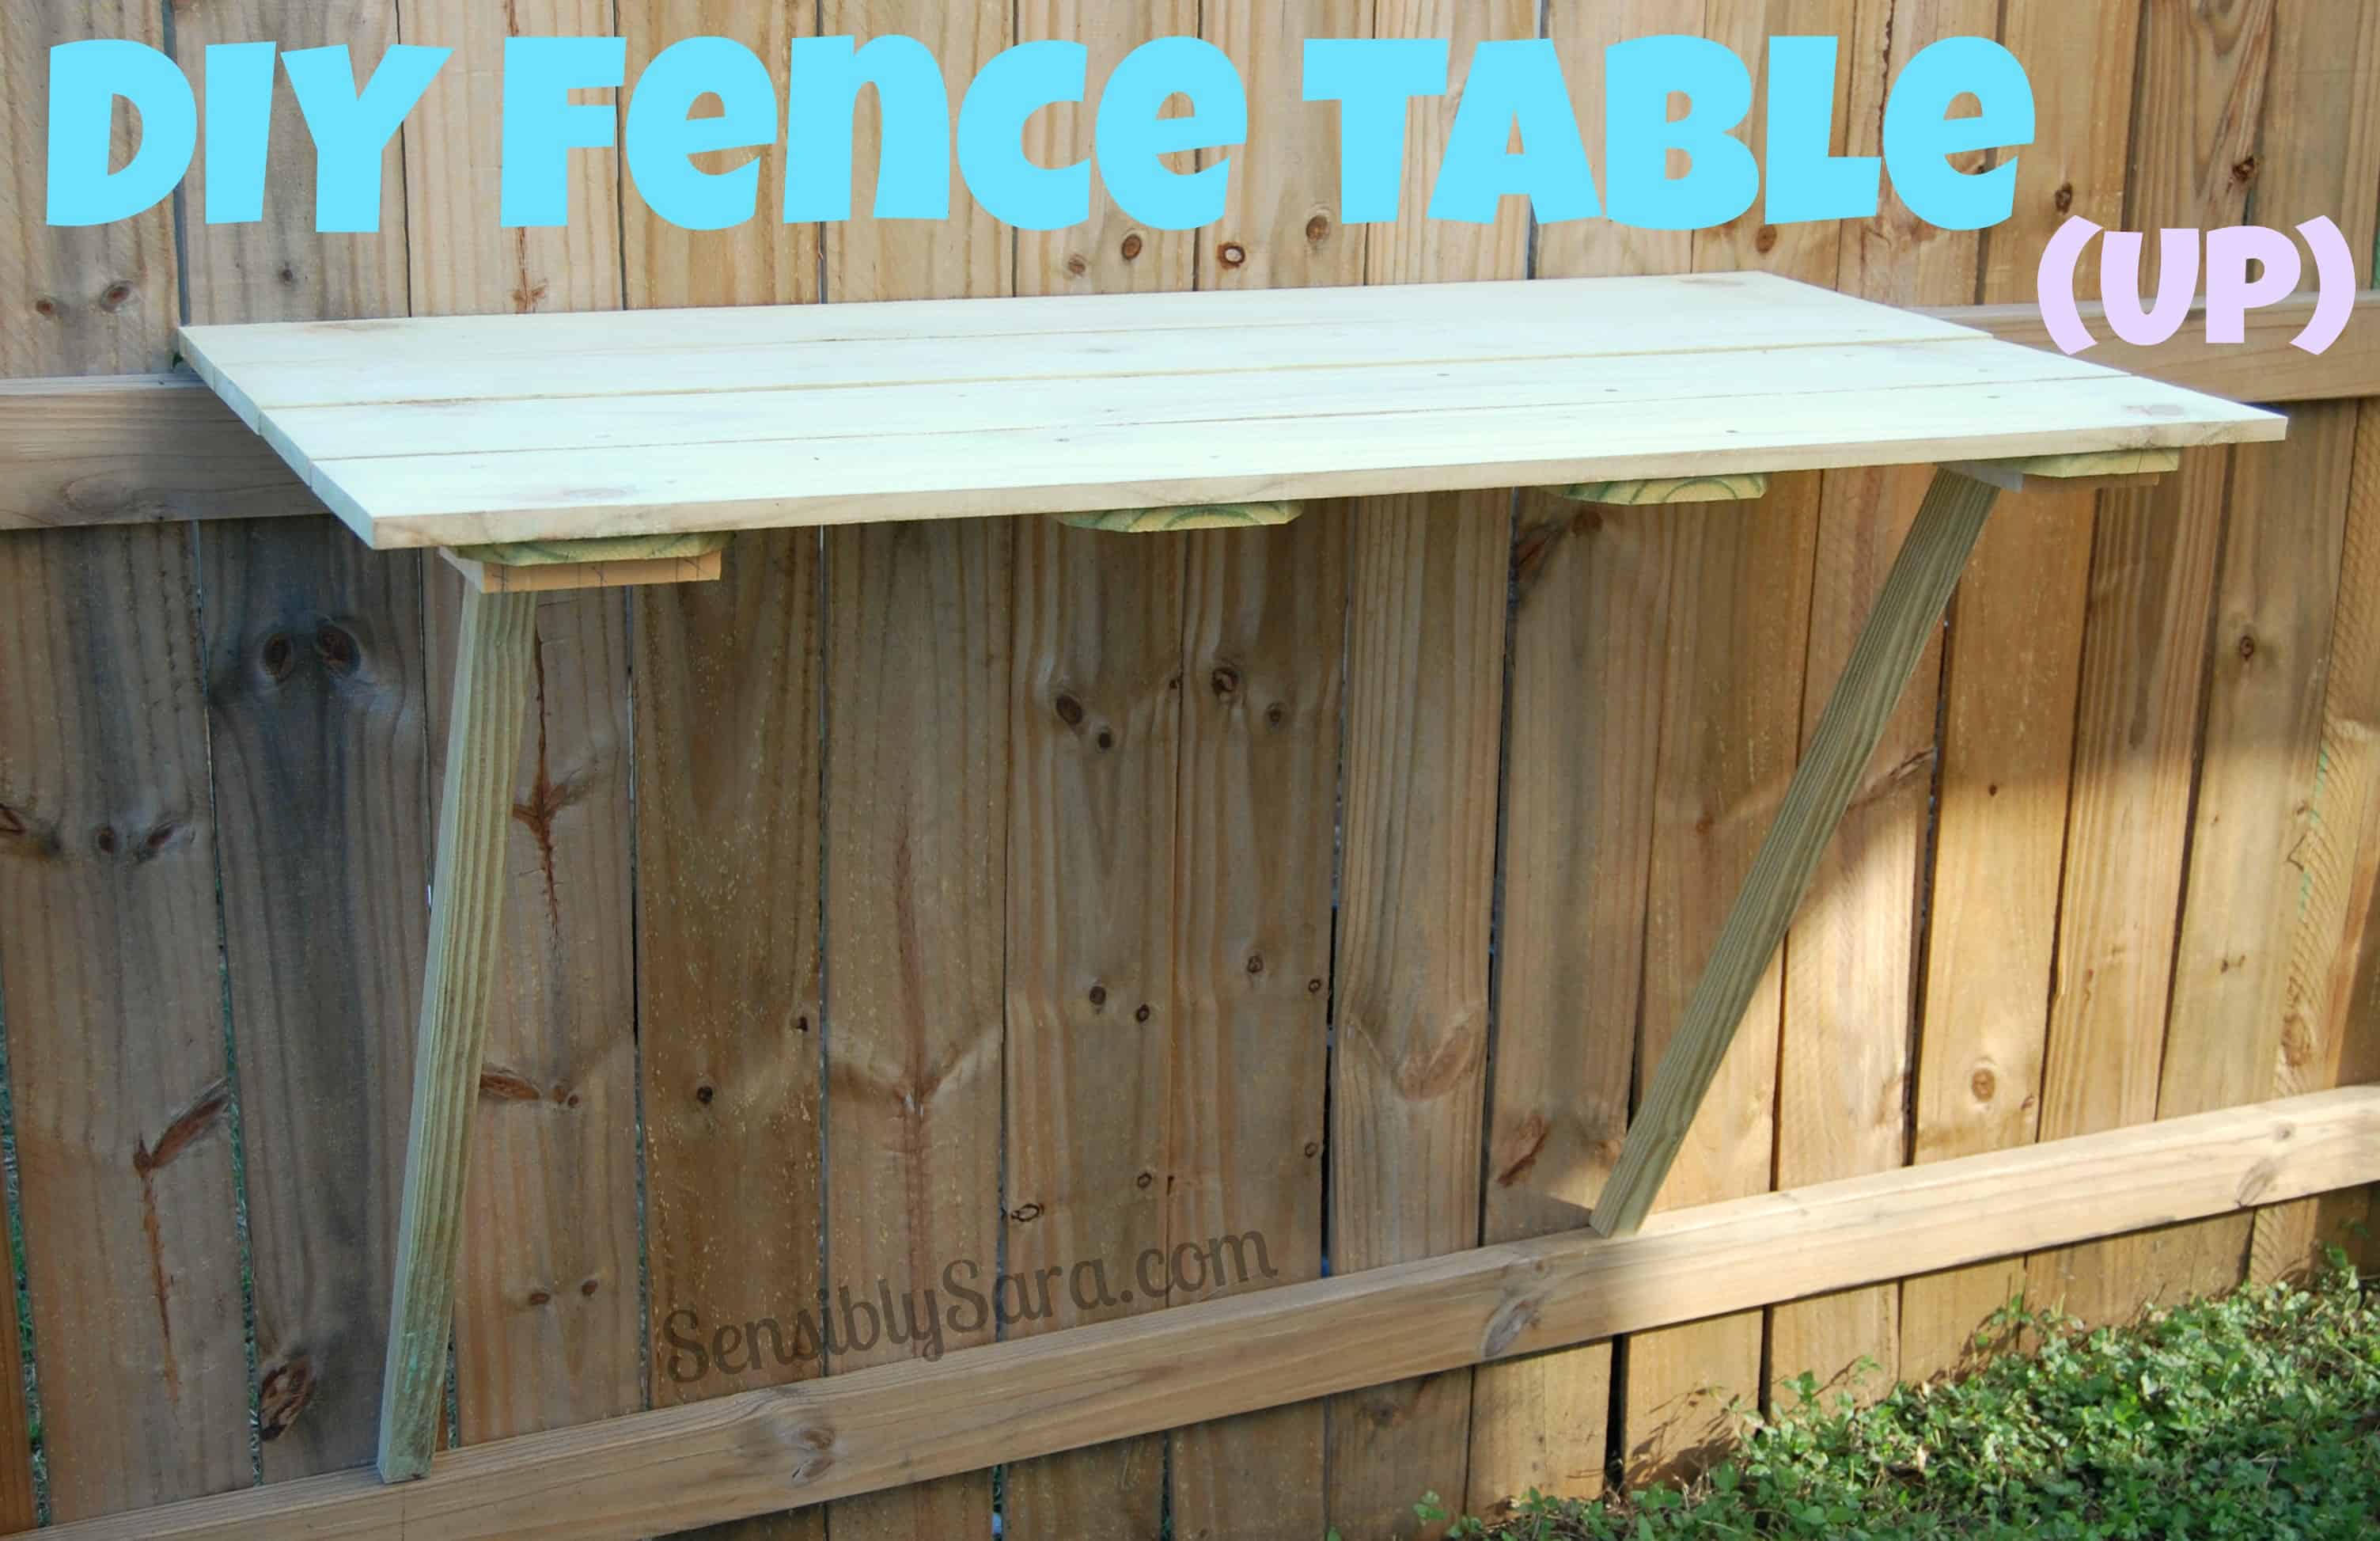 Table built into a fence in the up position